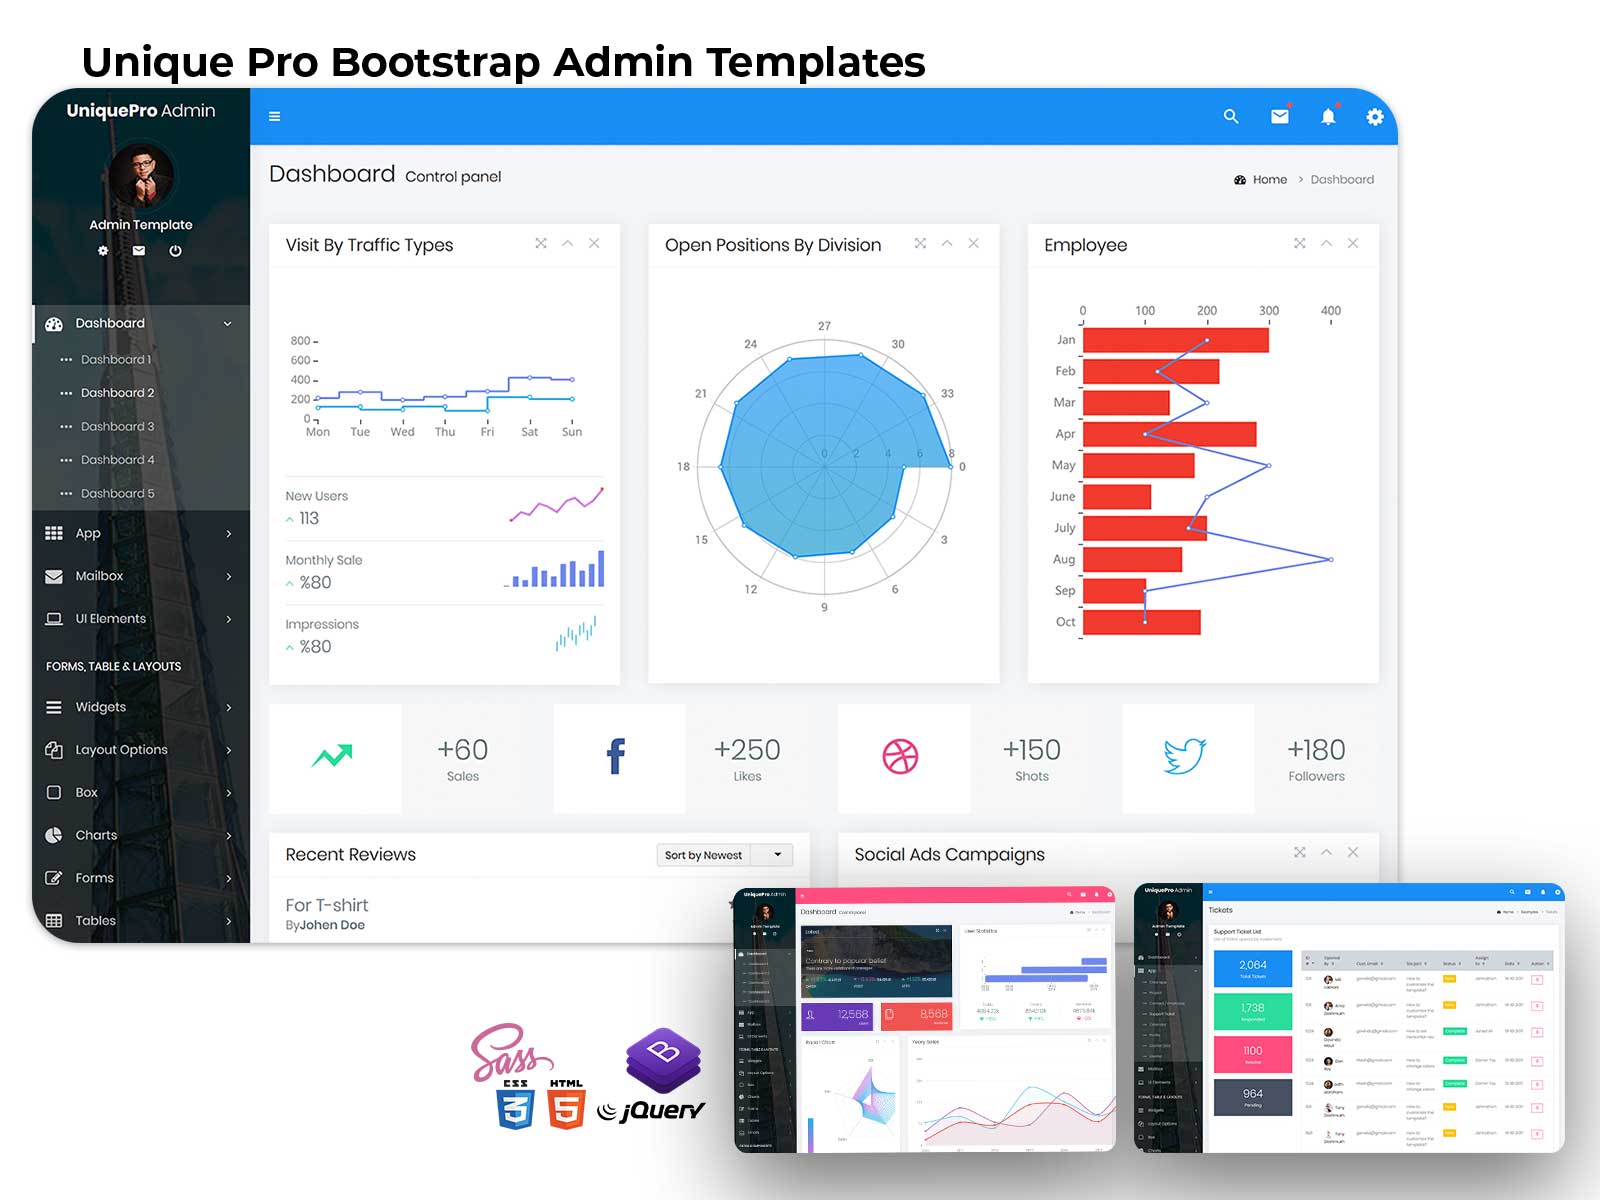 UniquePro Admin Responsive Web Application Kit With Bootstrap 4